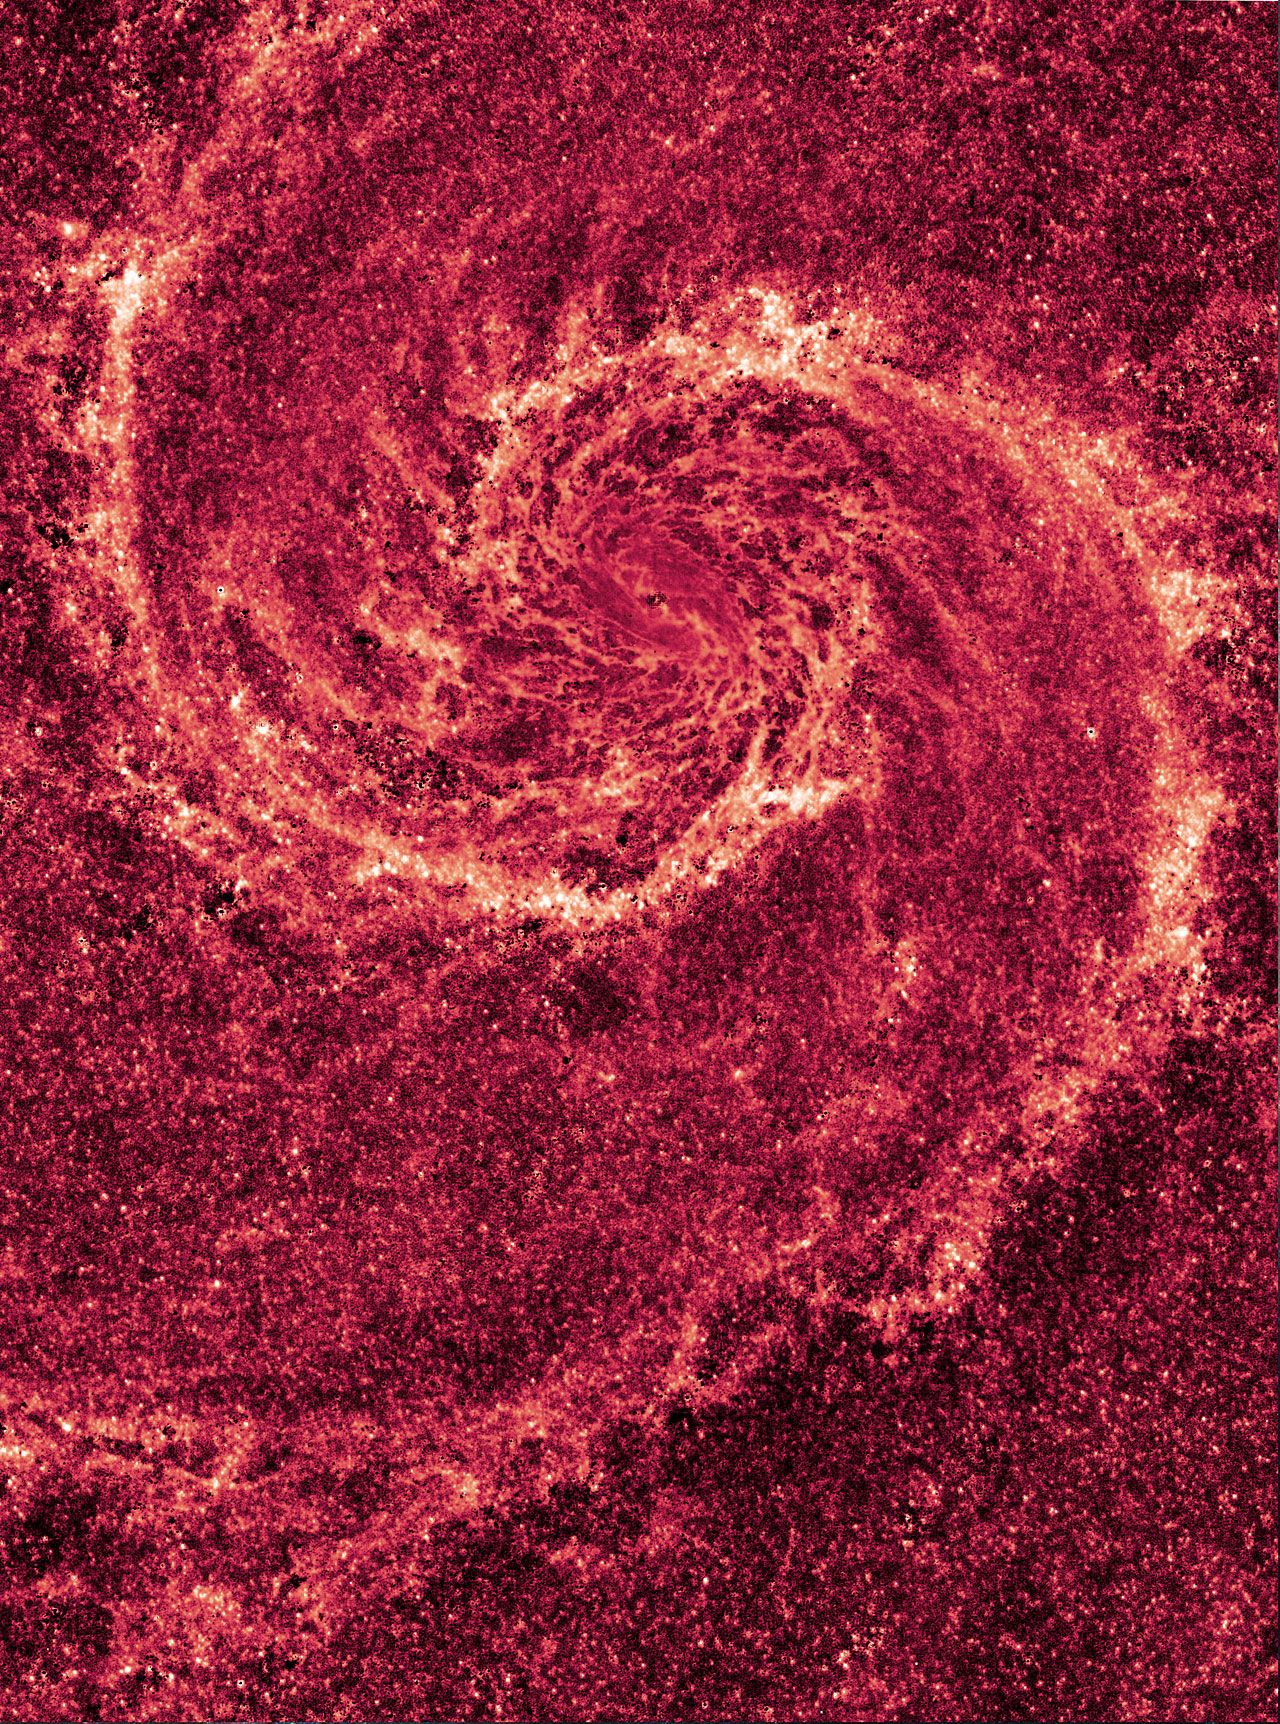 Hubble NICMOS Infrared Image Of M51